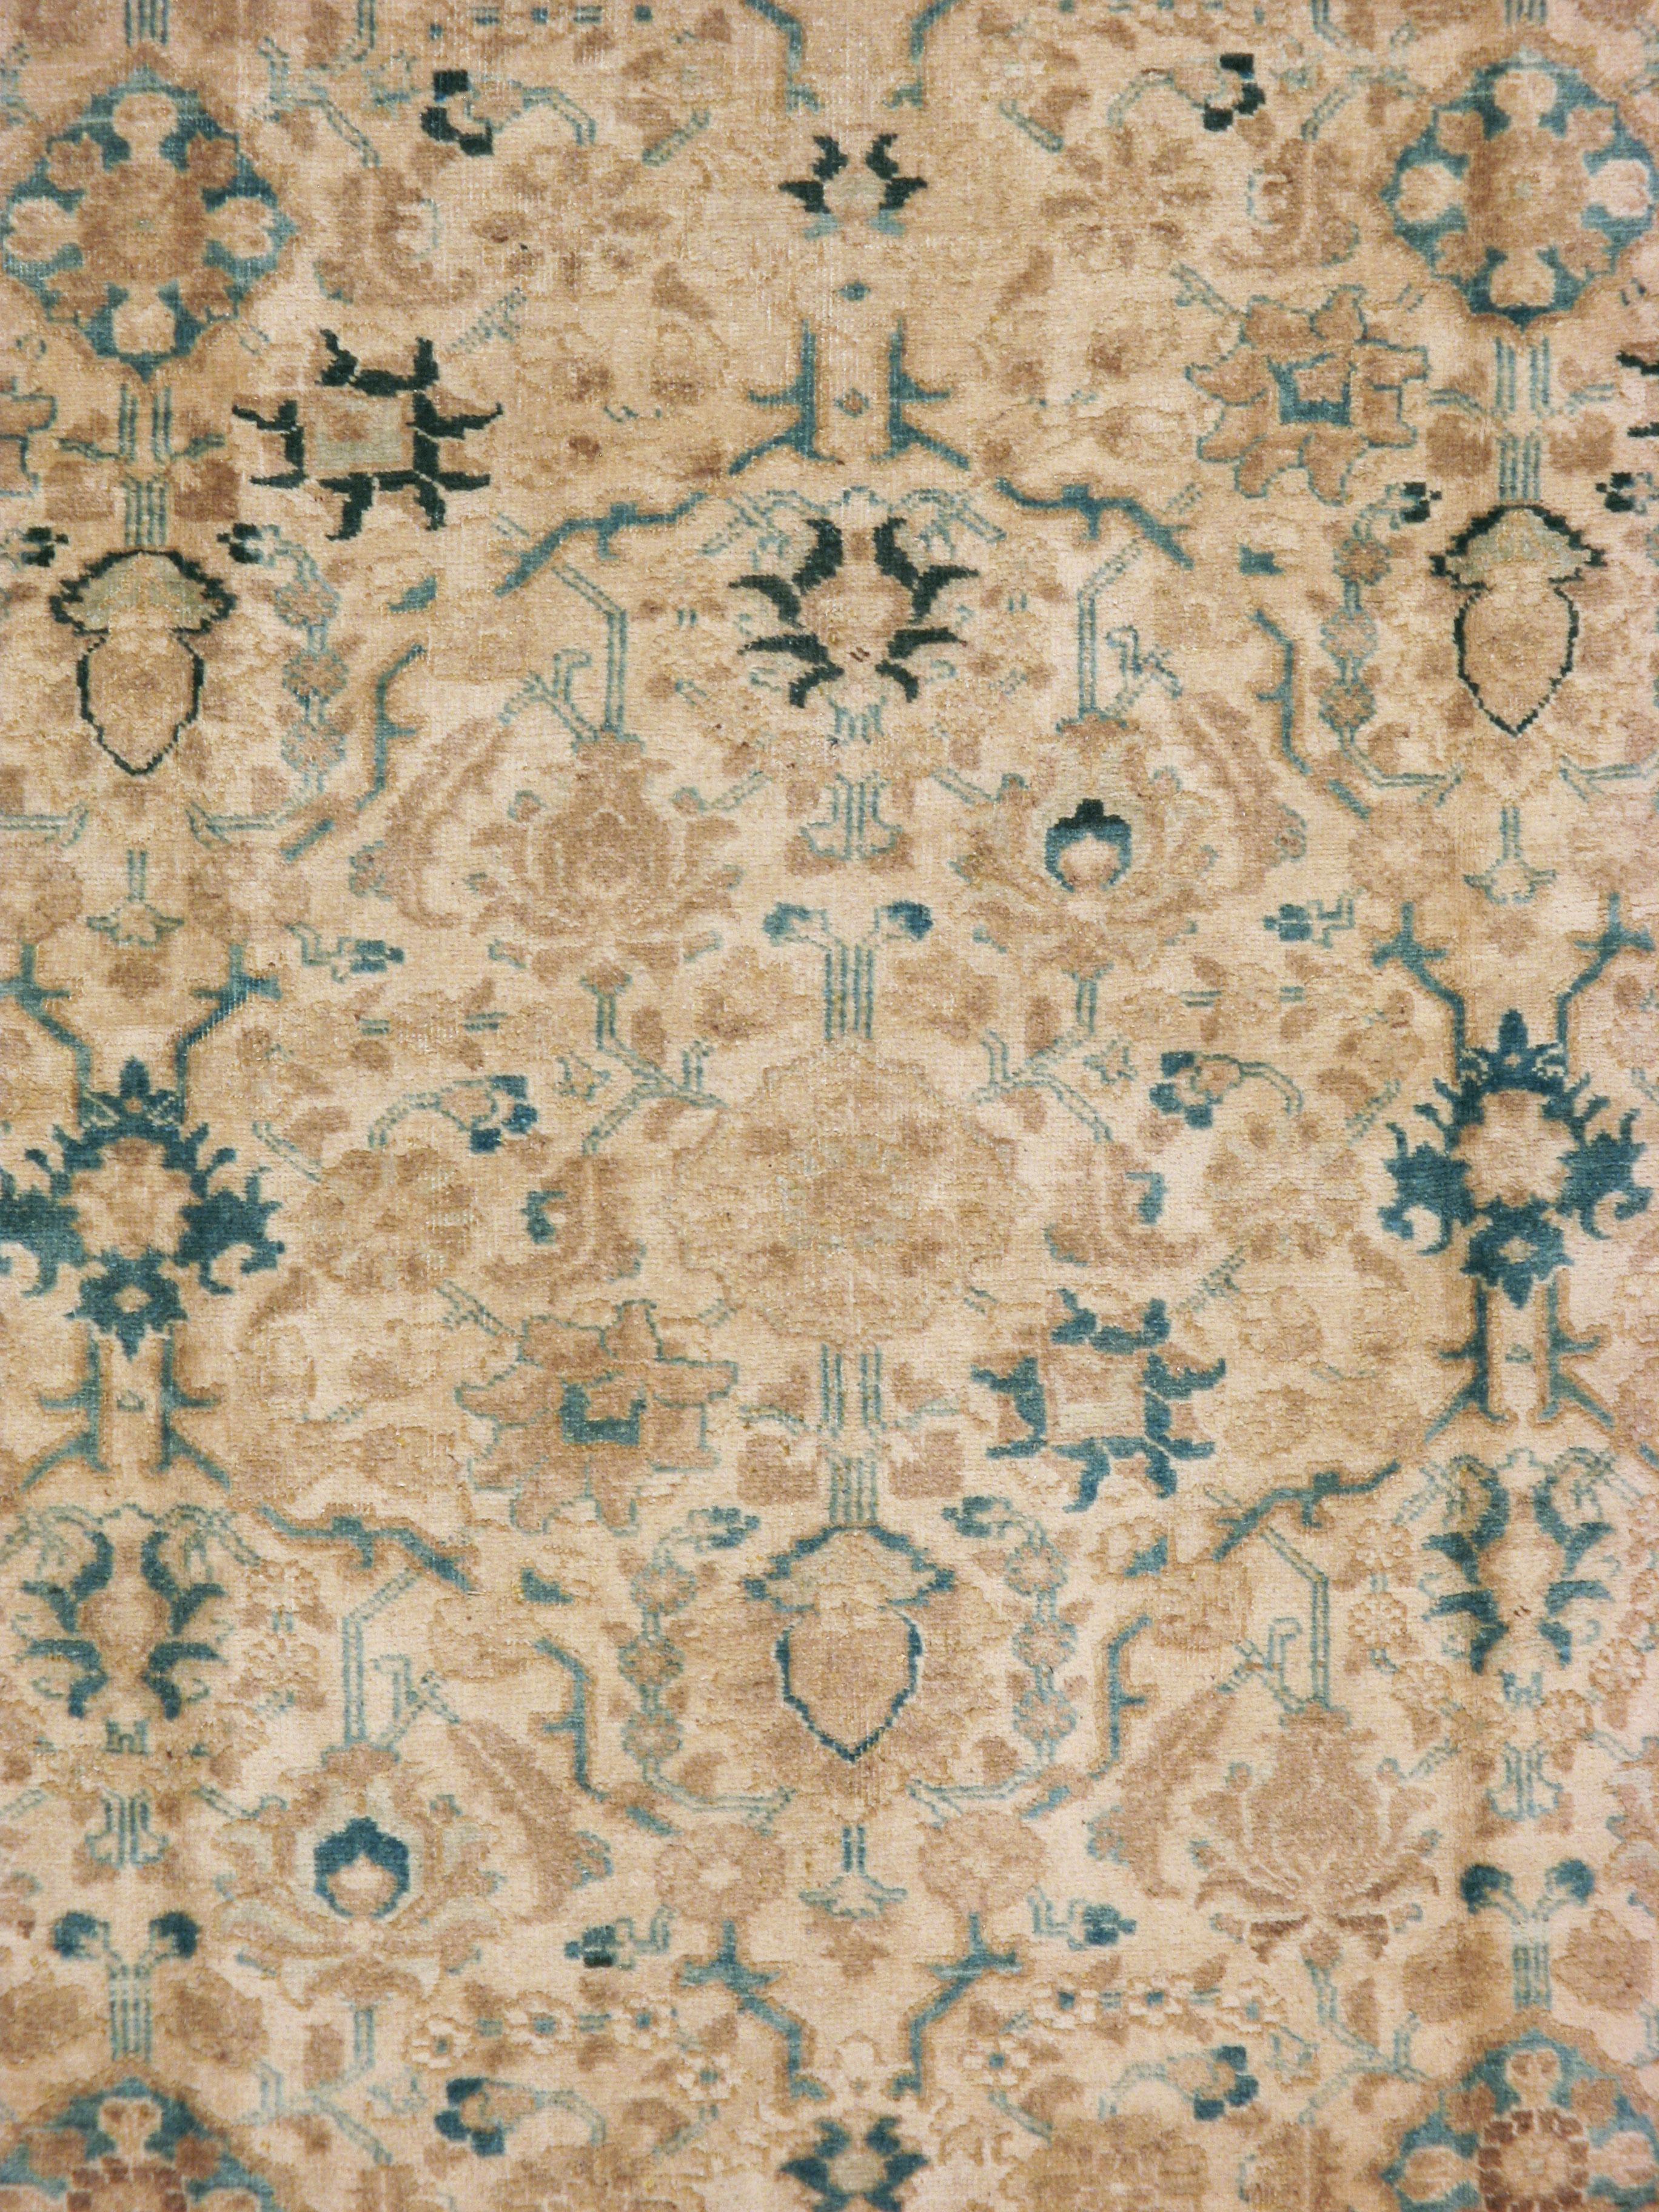 A vintage Persian Tabriz carpet from the mid-20th century. The ivory field is designed by vines and floral arrays in shades of seafoam green, blue, and light brown. The border used a reverse color palette to contrast gently against the field.